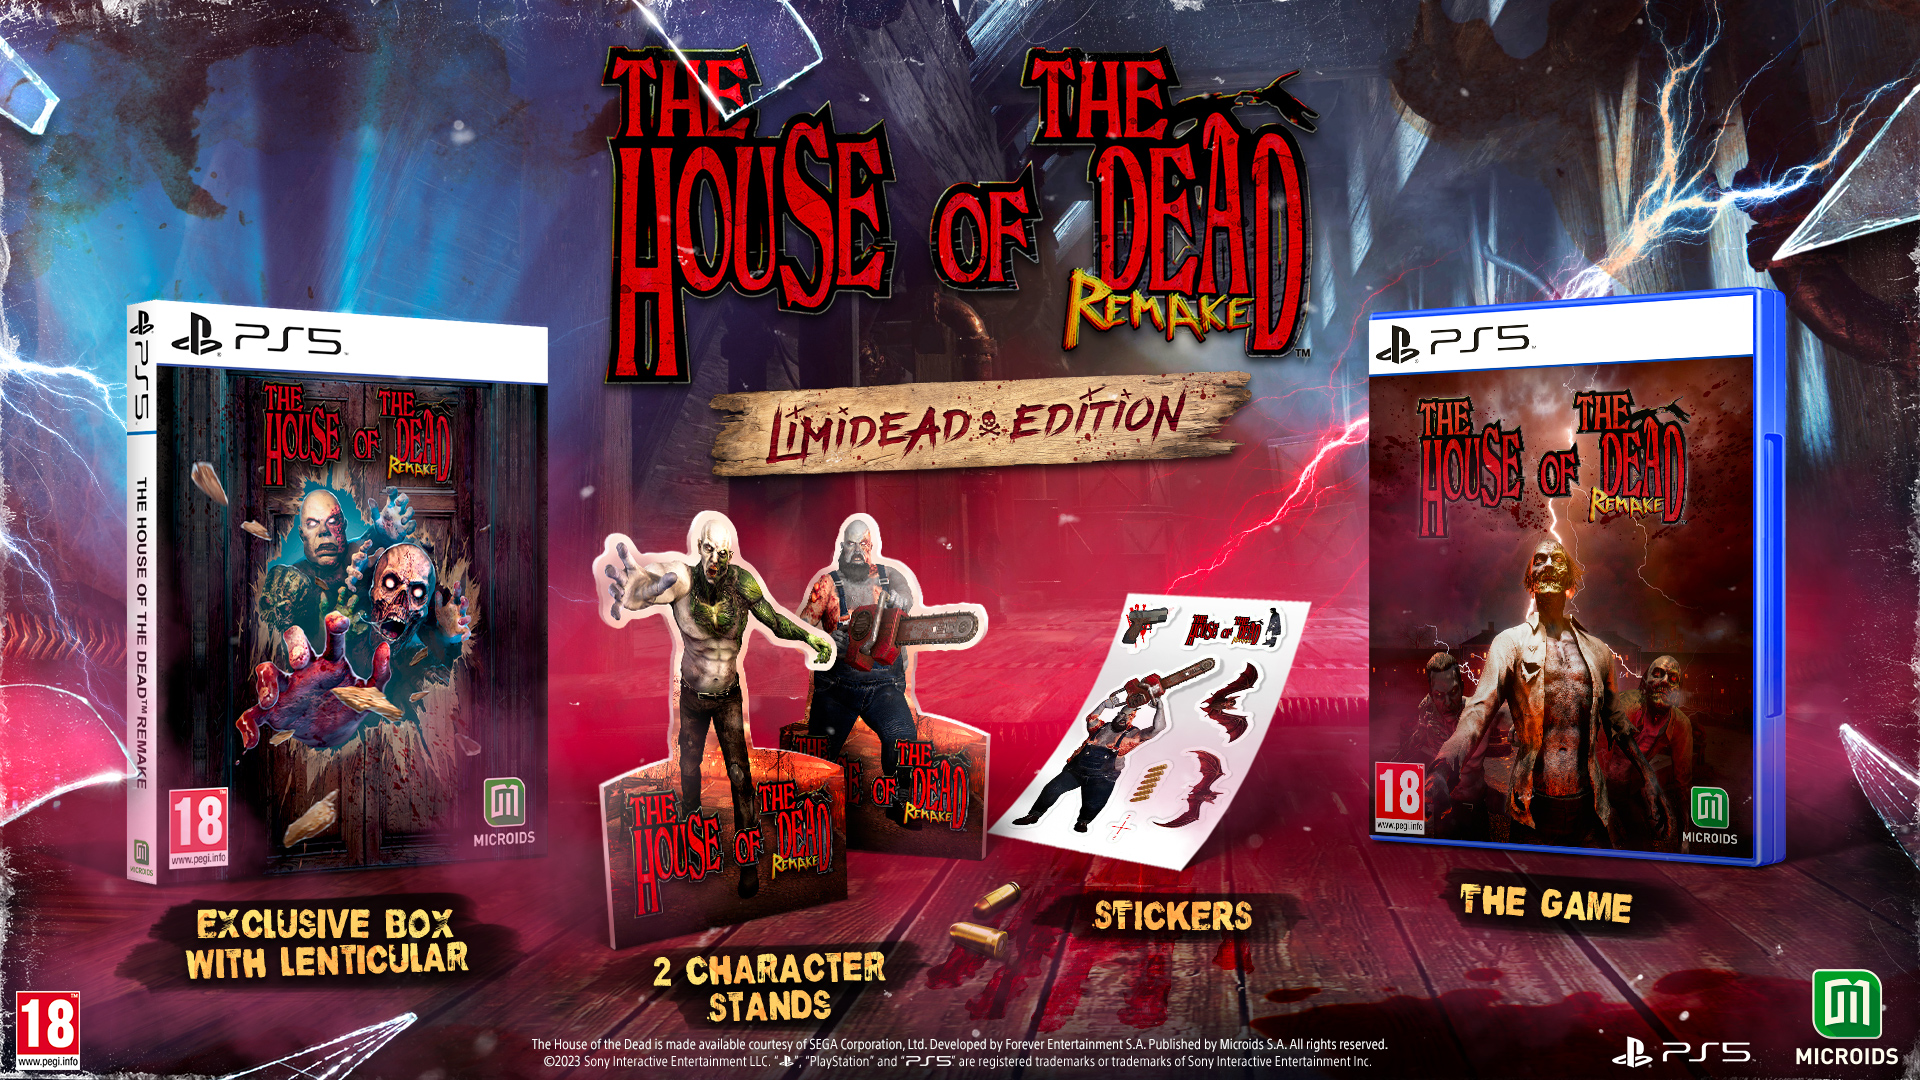 The House of the Dead: Remake Limidead Edition